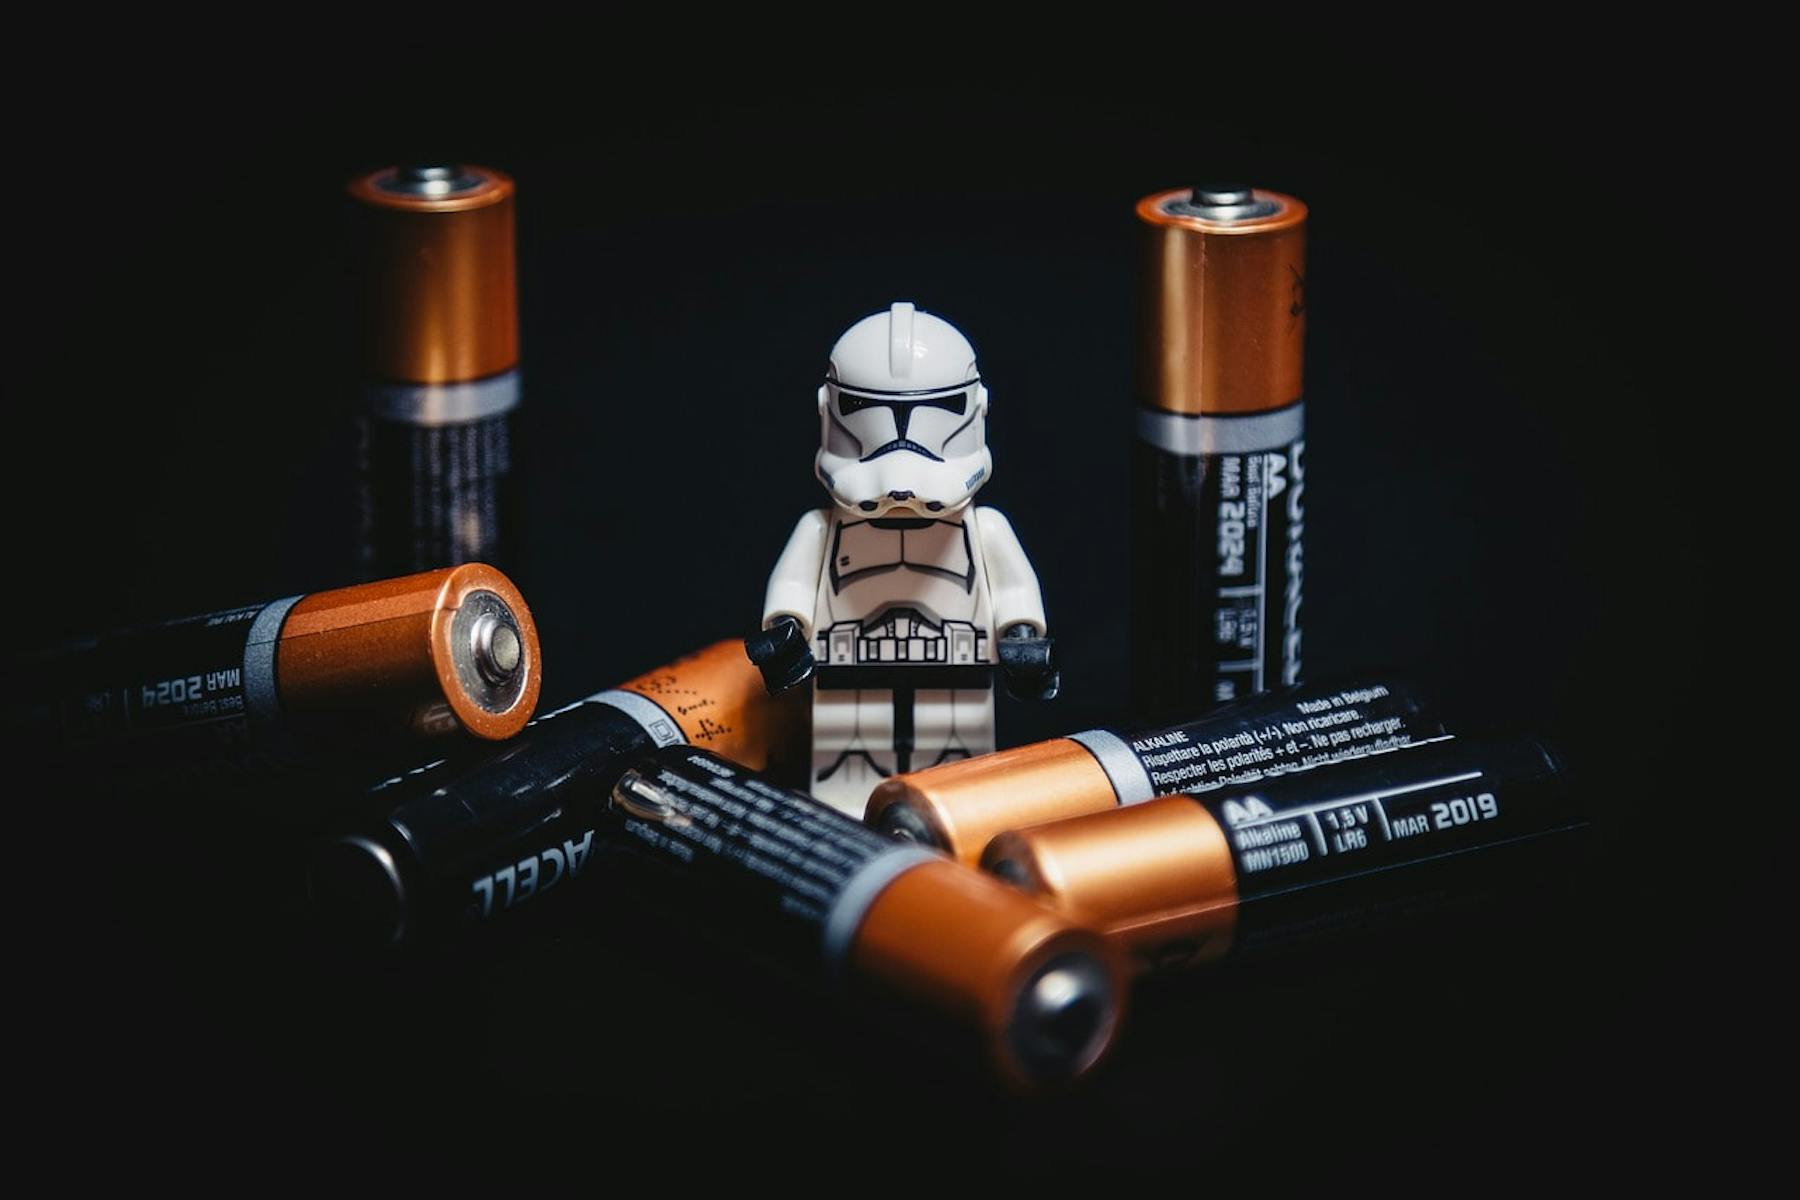 Batteries with star wars lego